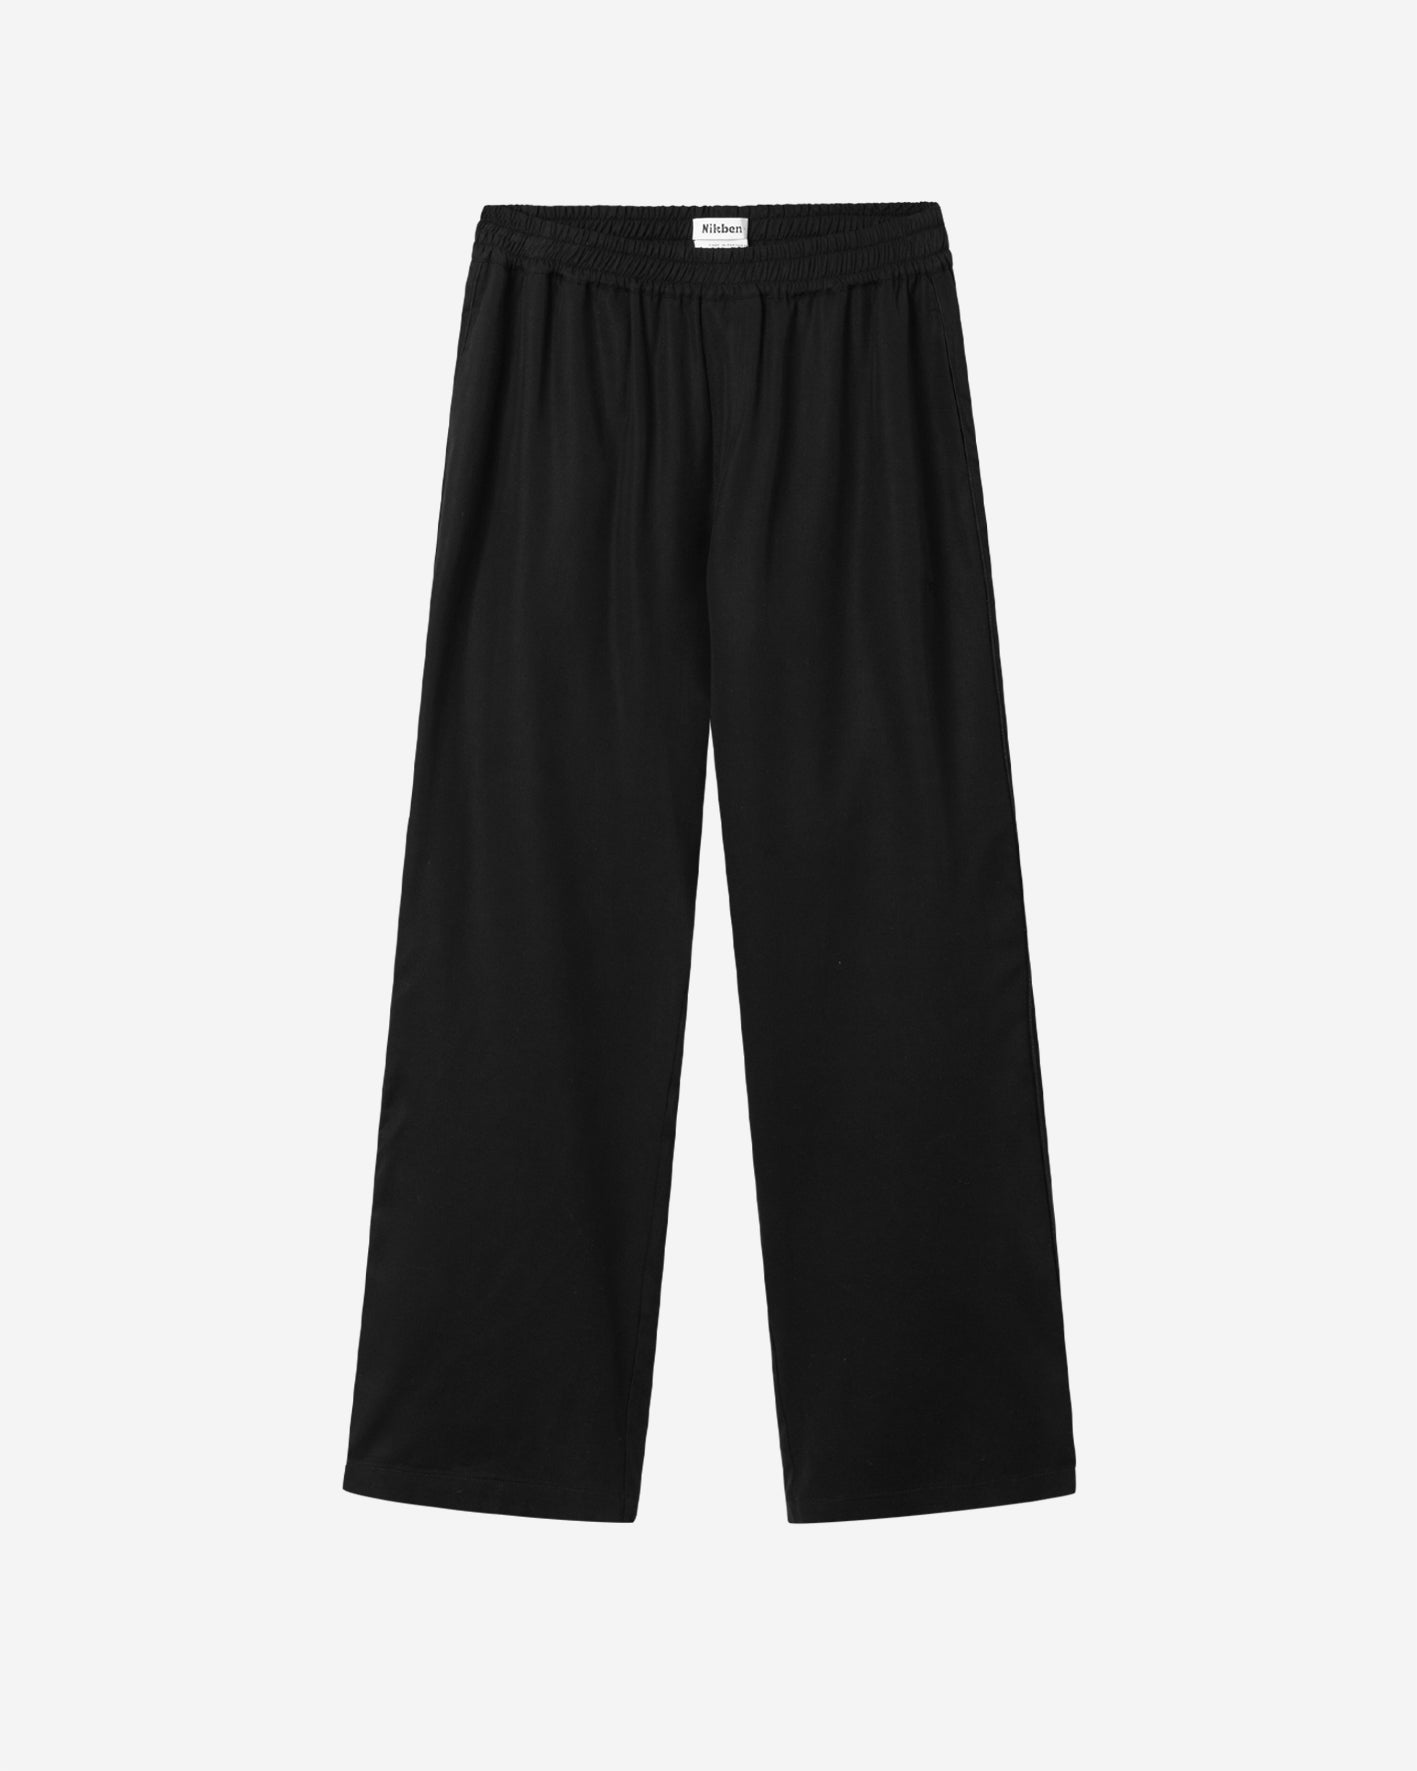 Black vacation pants with two front pockets and an elastic drawstring. 